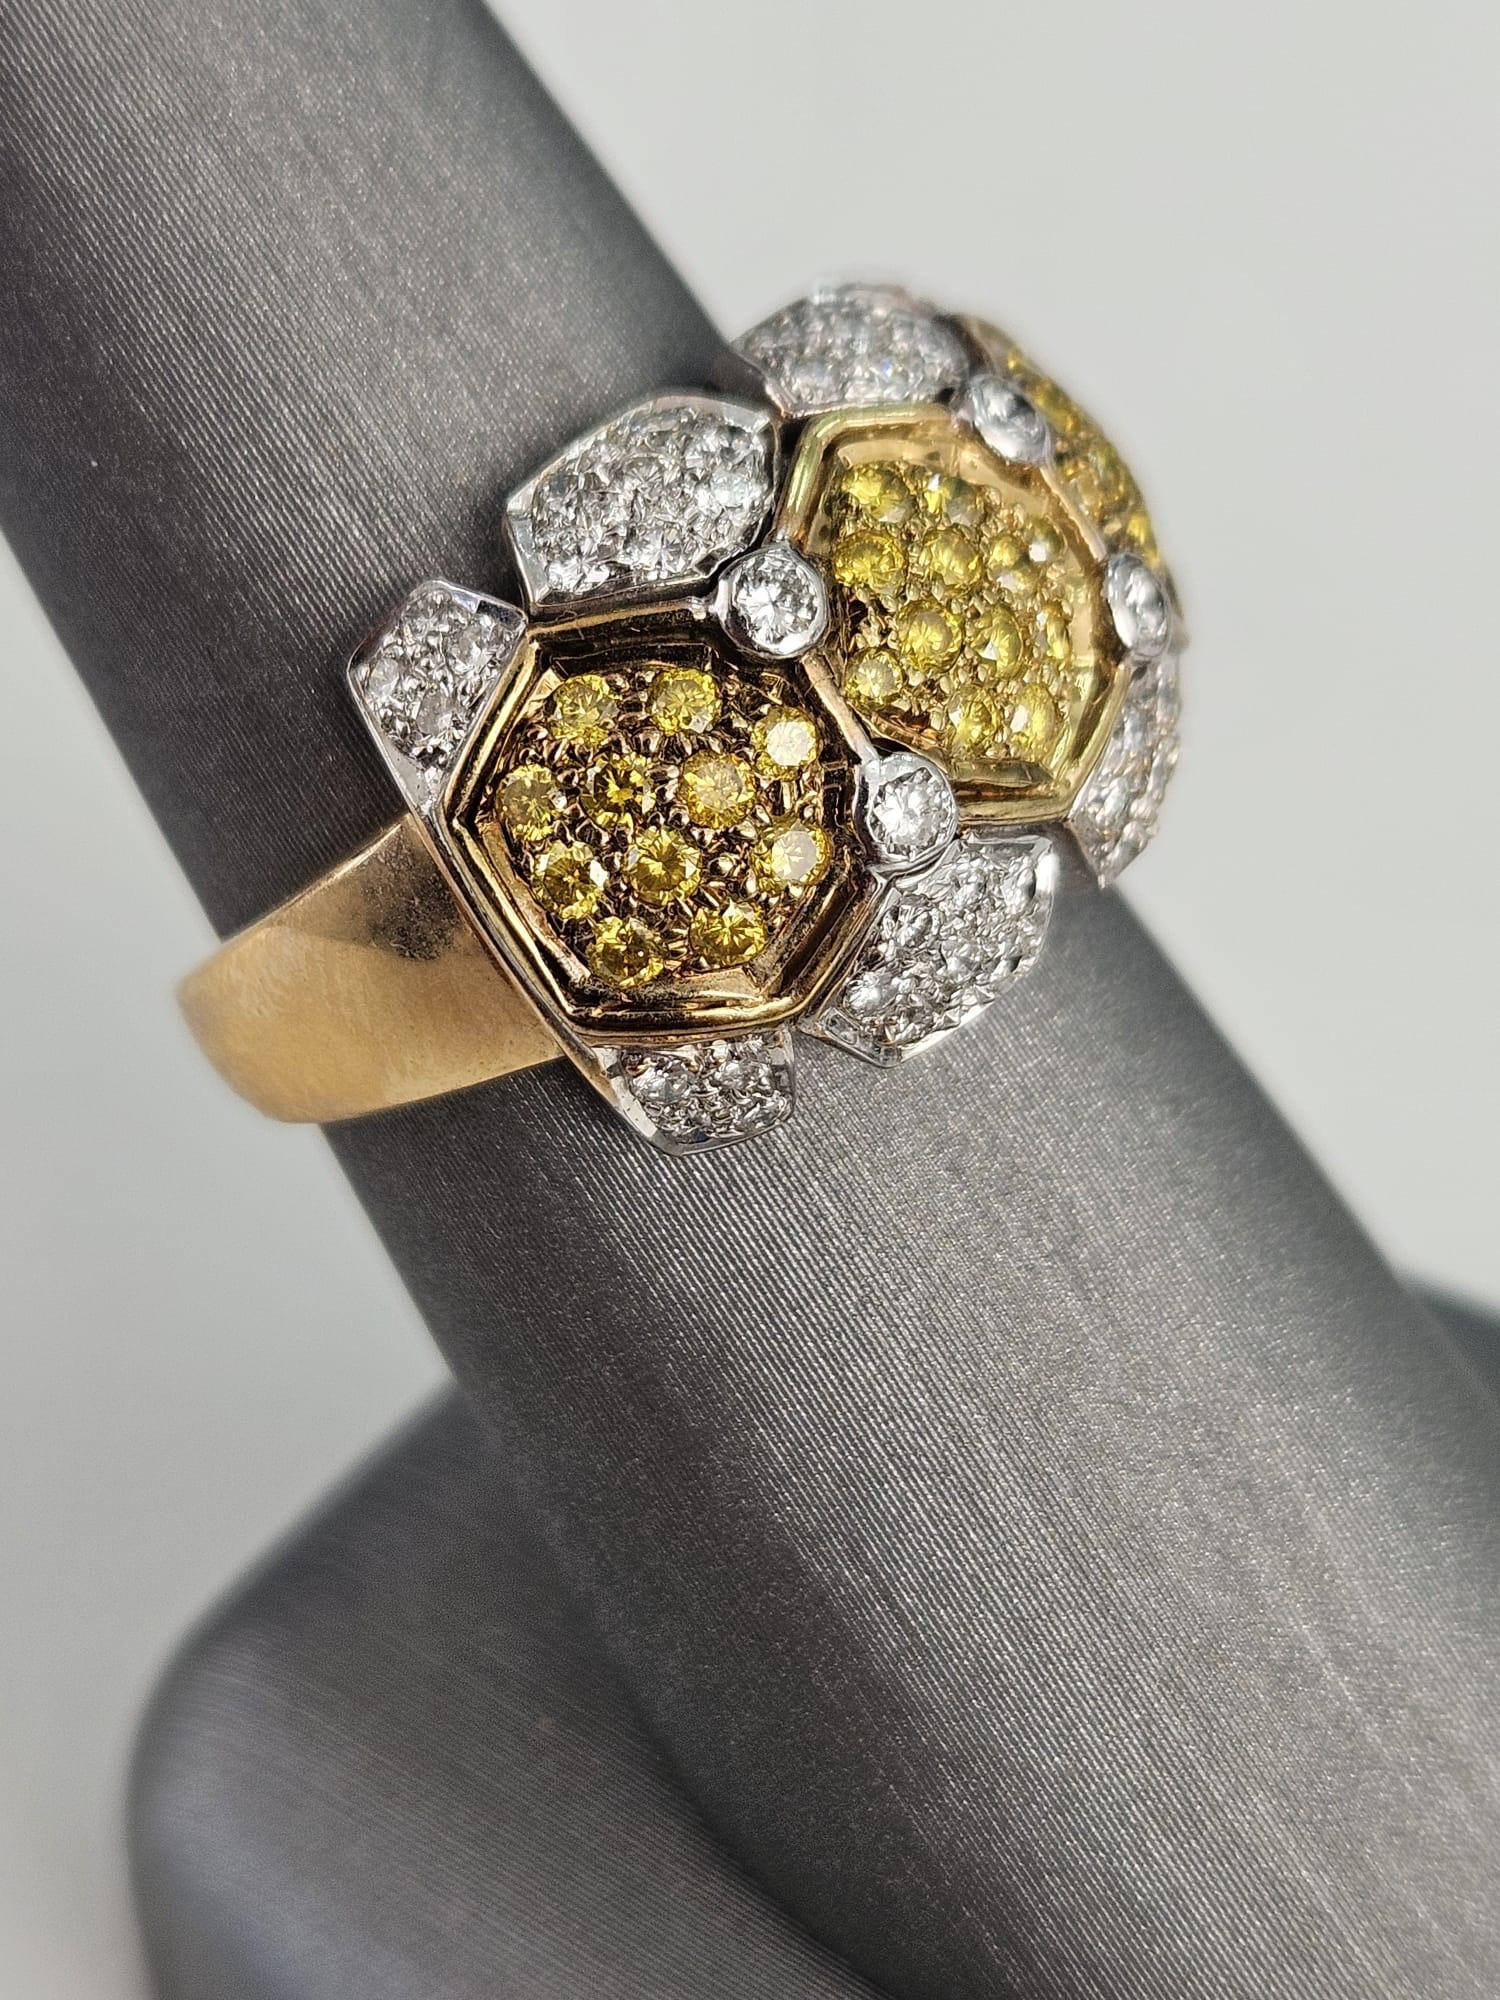 An enchanting 1.27 carat Canary Diamond band ring that marries the warmth of yellow diamonds with the timeless sparkle of white diamonds, forming a captivating pattern of hexagons. At the heart of this exquisite piece is a radiant 0.60-carat Canary